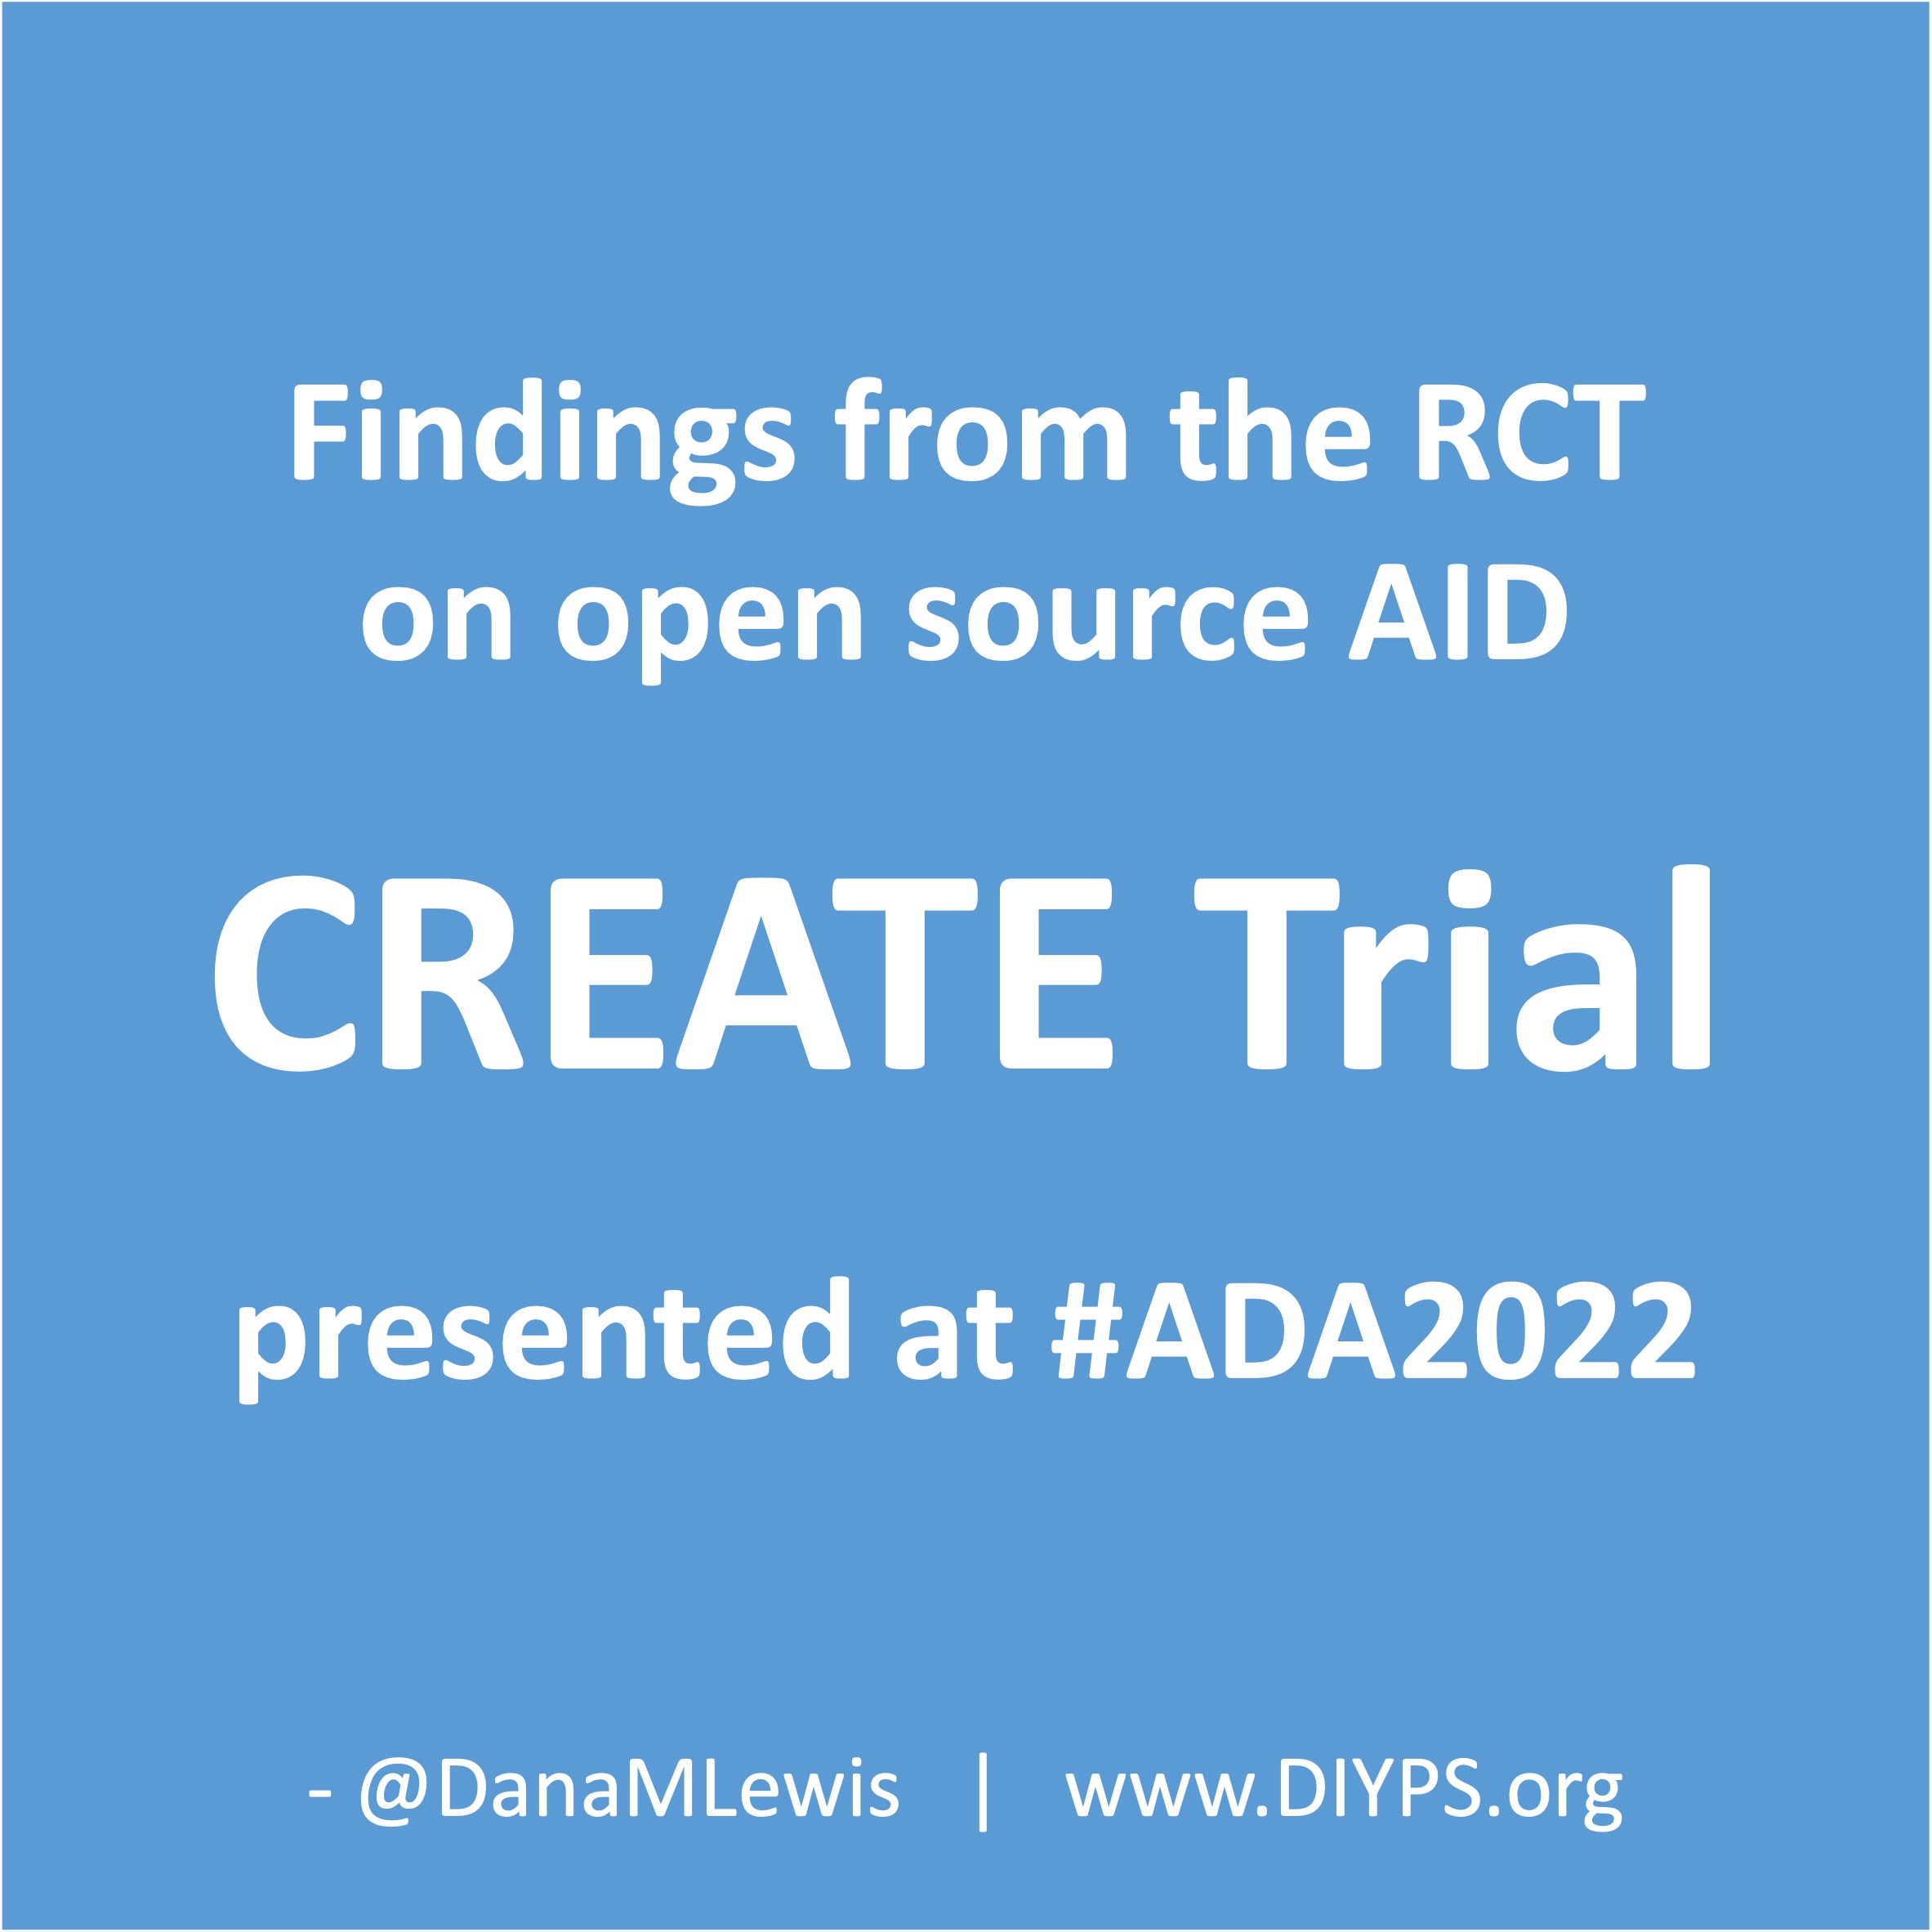 Findings from the RCT on open source AID, the CREATE Trial, presented at #ADA2022